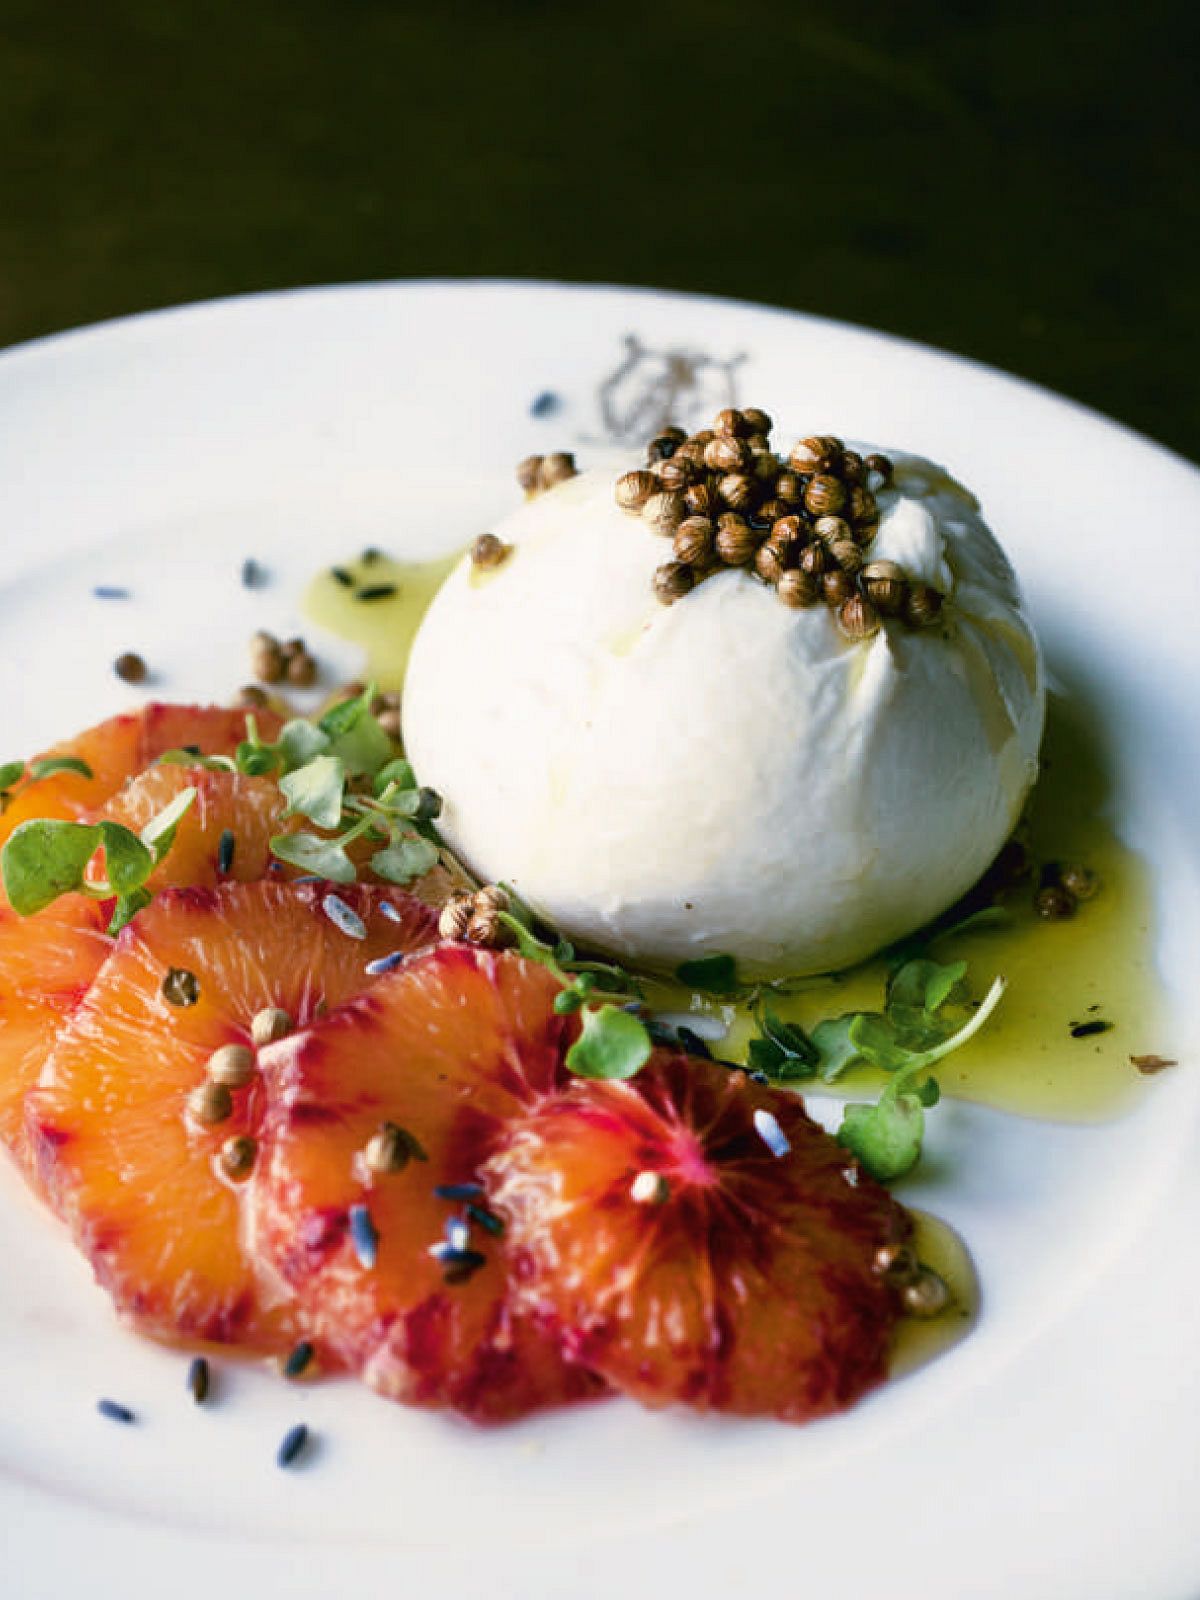 Ottolenghi’s Burrata with Blood Orange, Coriander Seeds and Lavender Oil